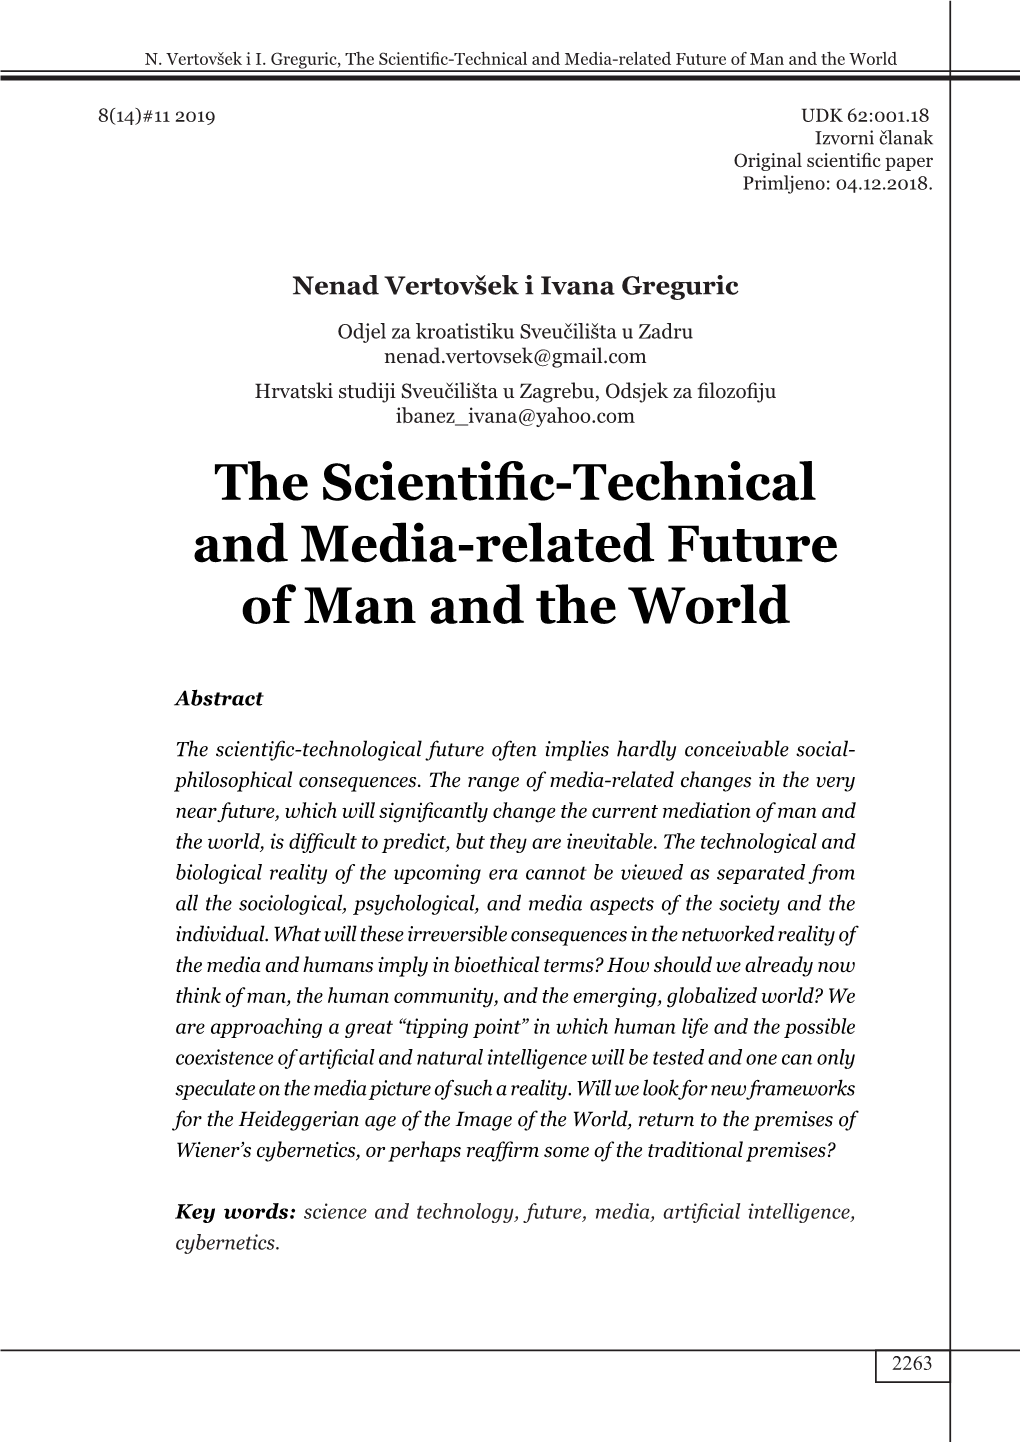 The Scientific-Technical and Media-Related Future of Man and the World